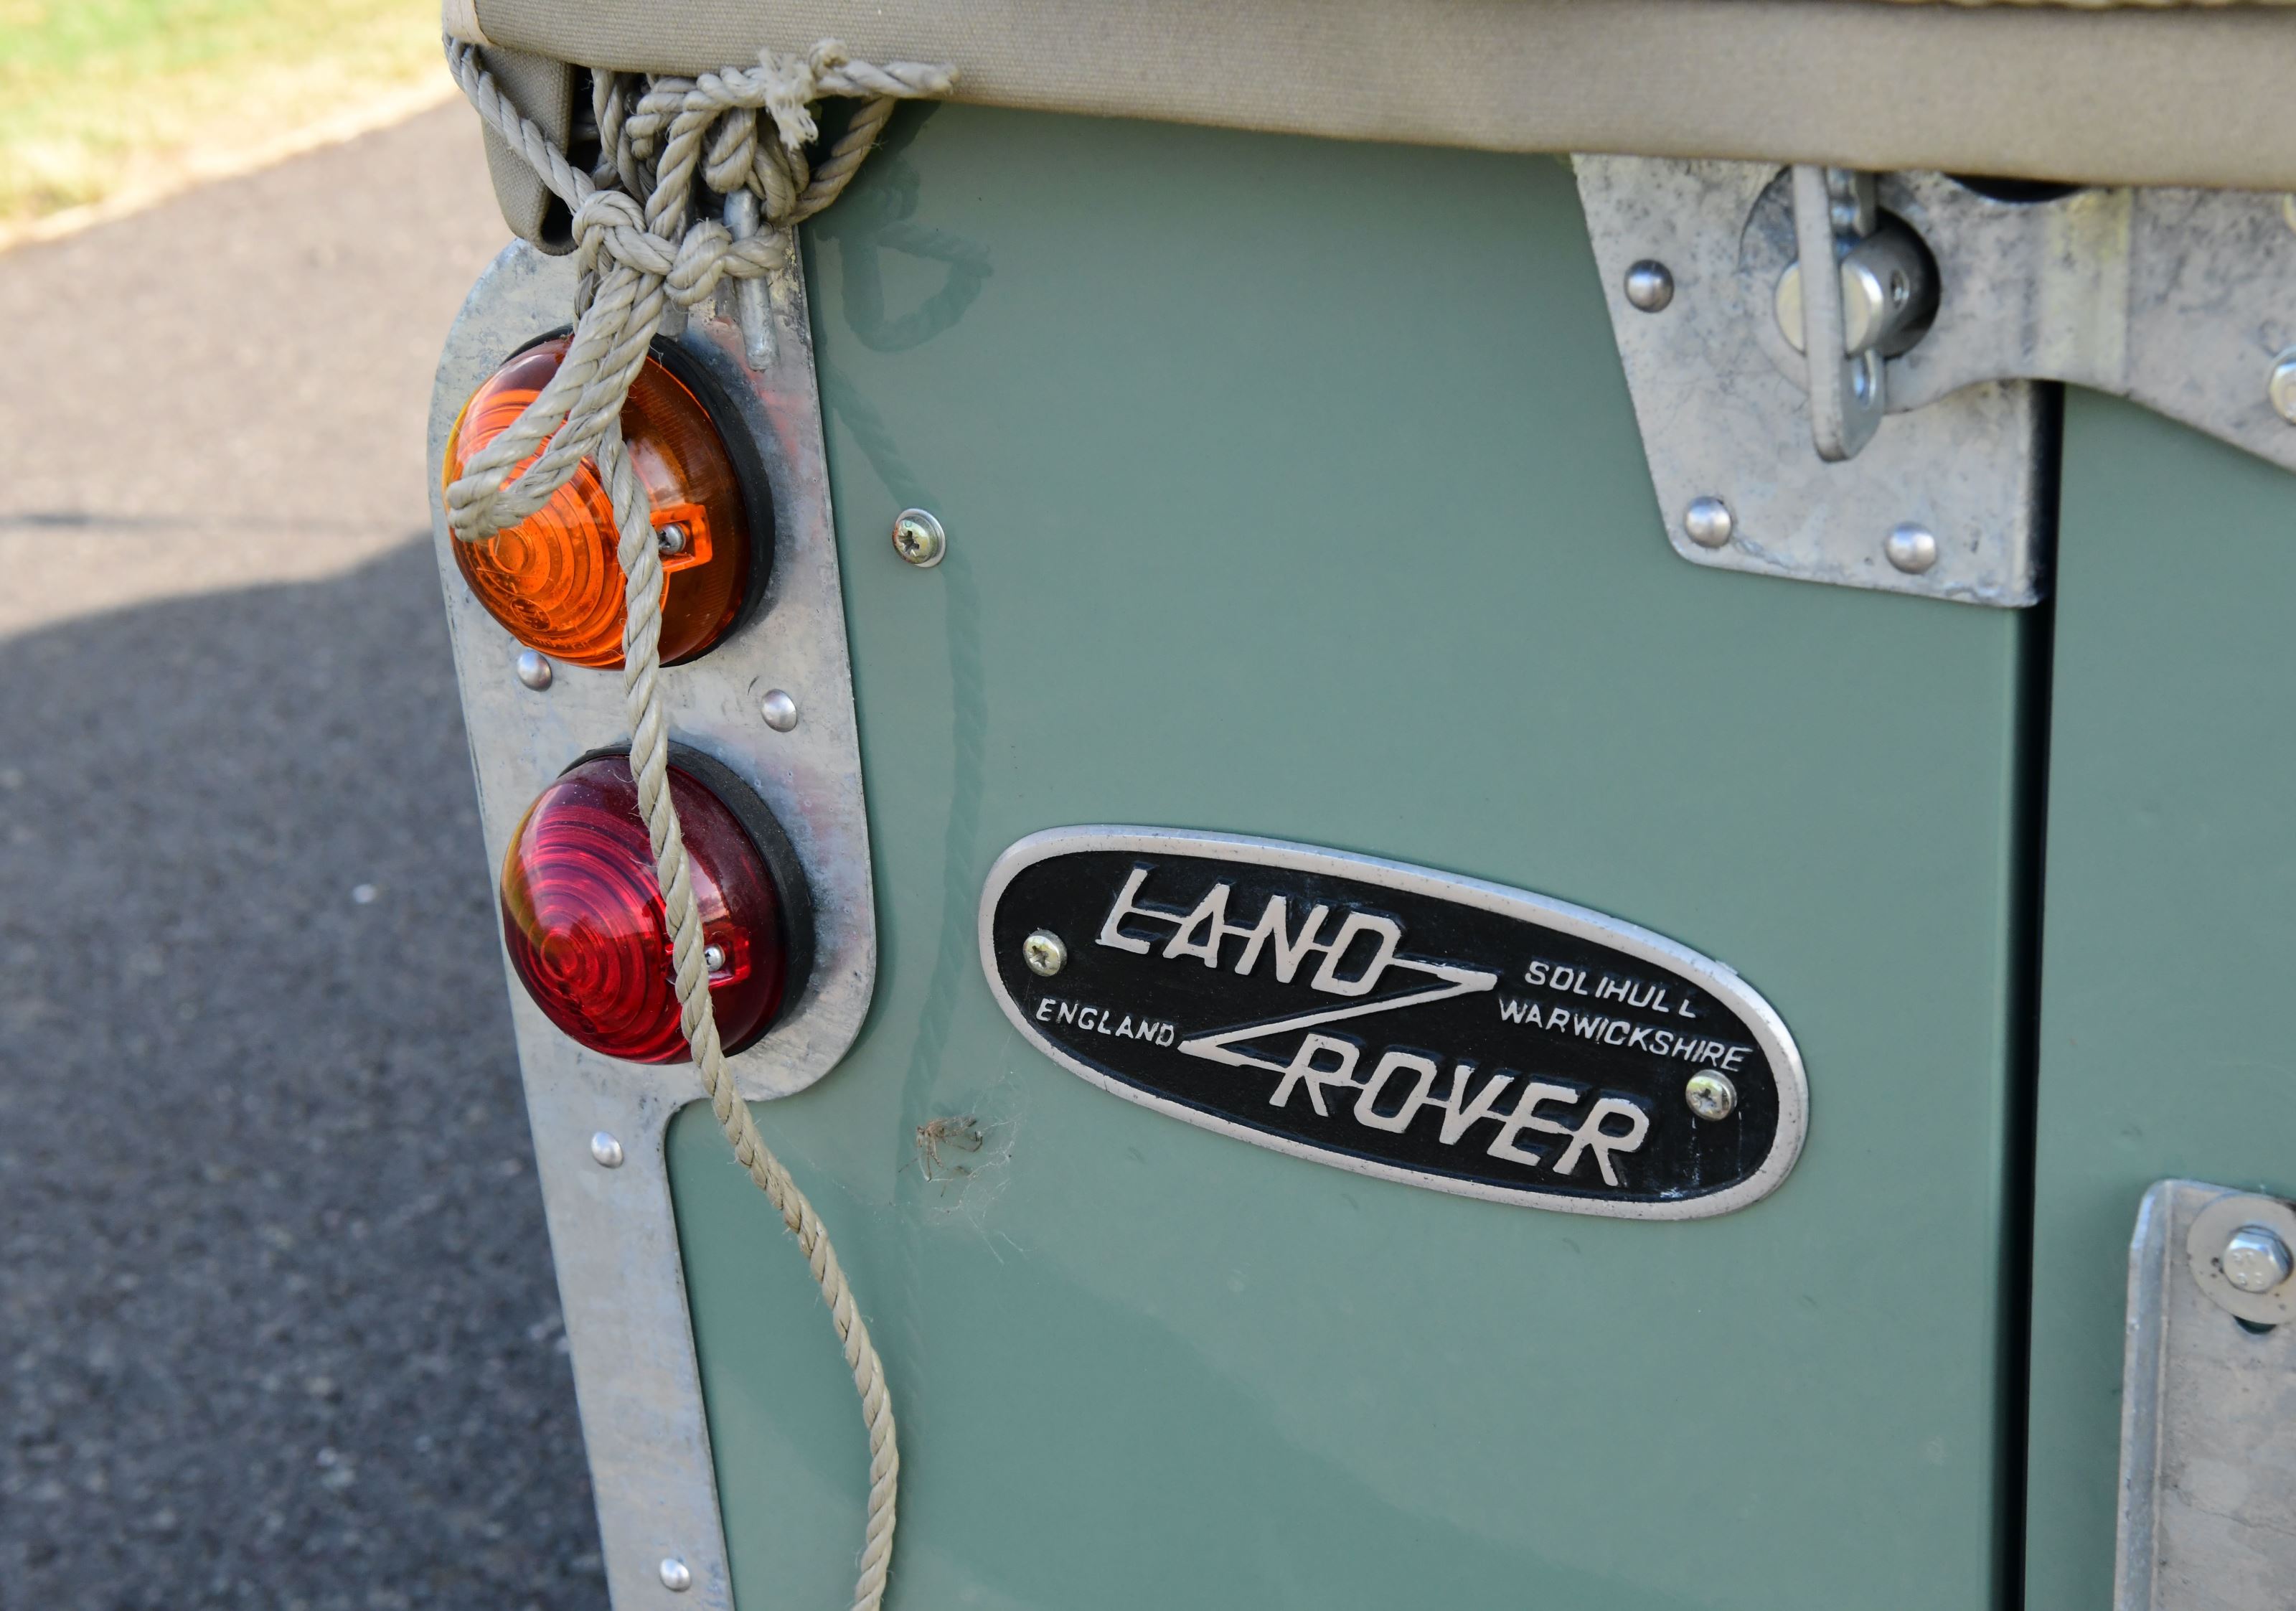 Land rover series 2a swb 88 with overdrive f4xvojgea16y 0ue8cxgq